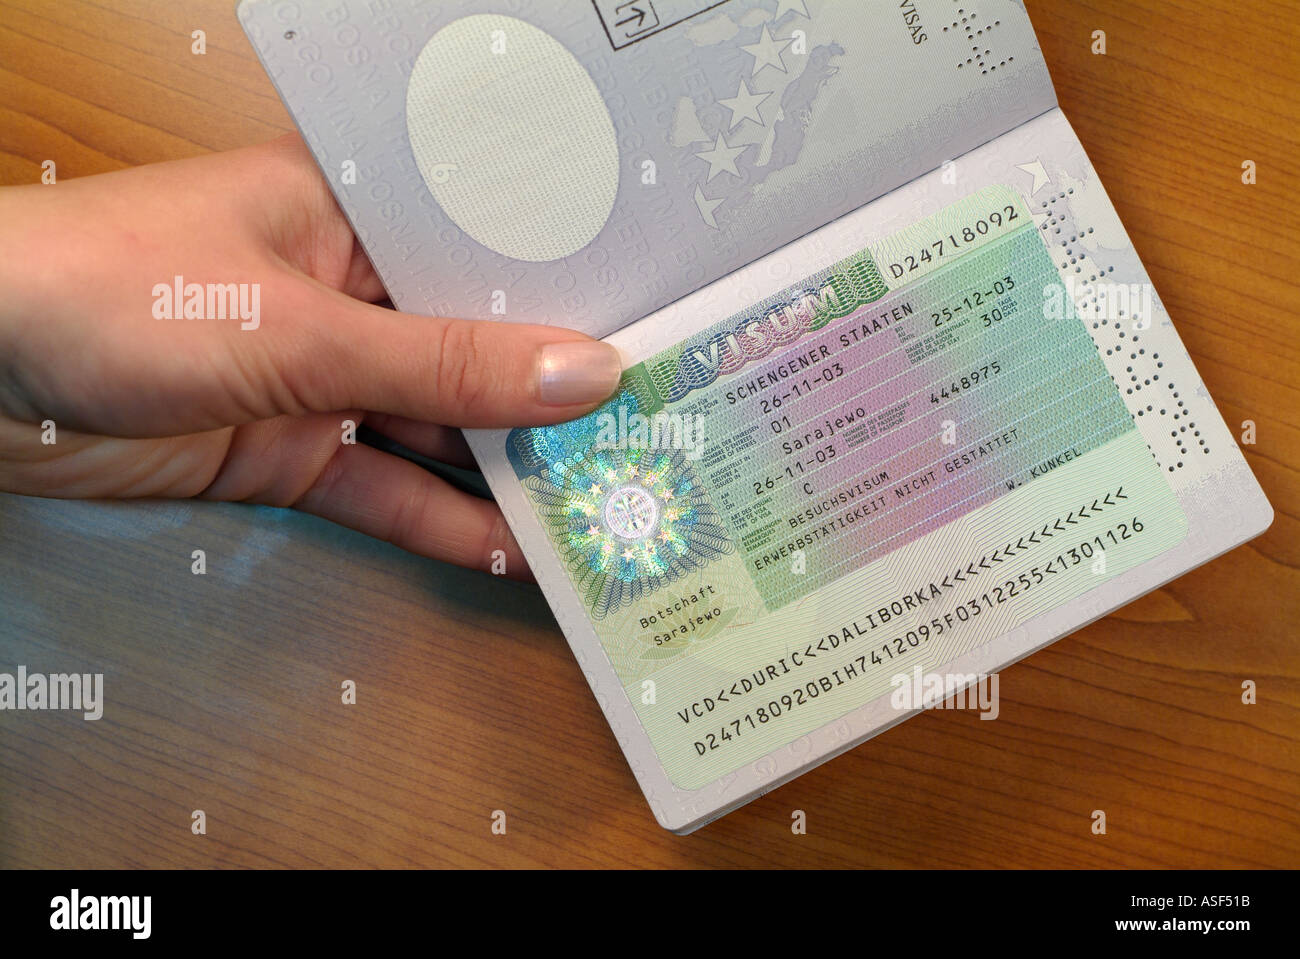 Eastern European Woman Passing over a Passport with a German Visa on the Page, Close Up. Stock Photo